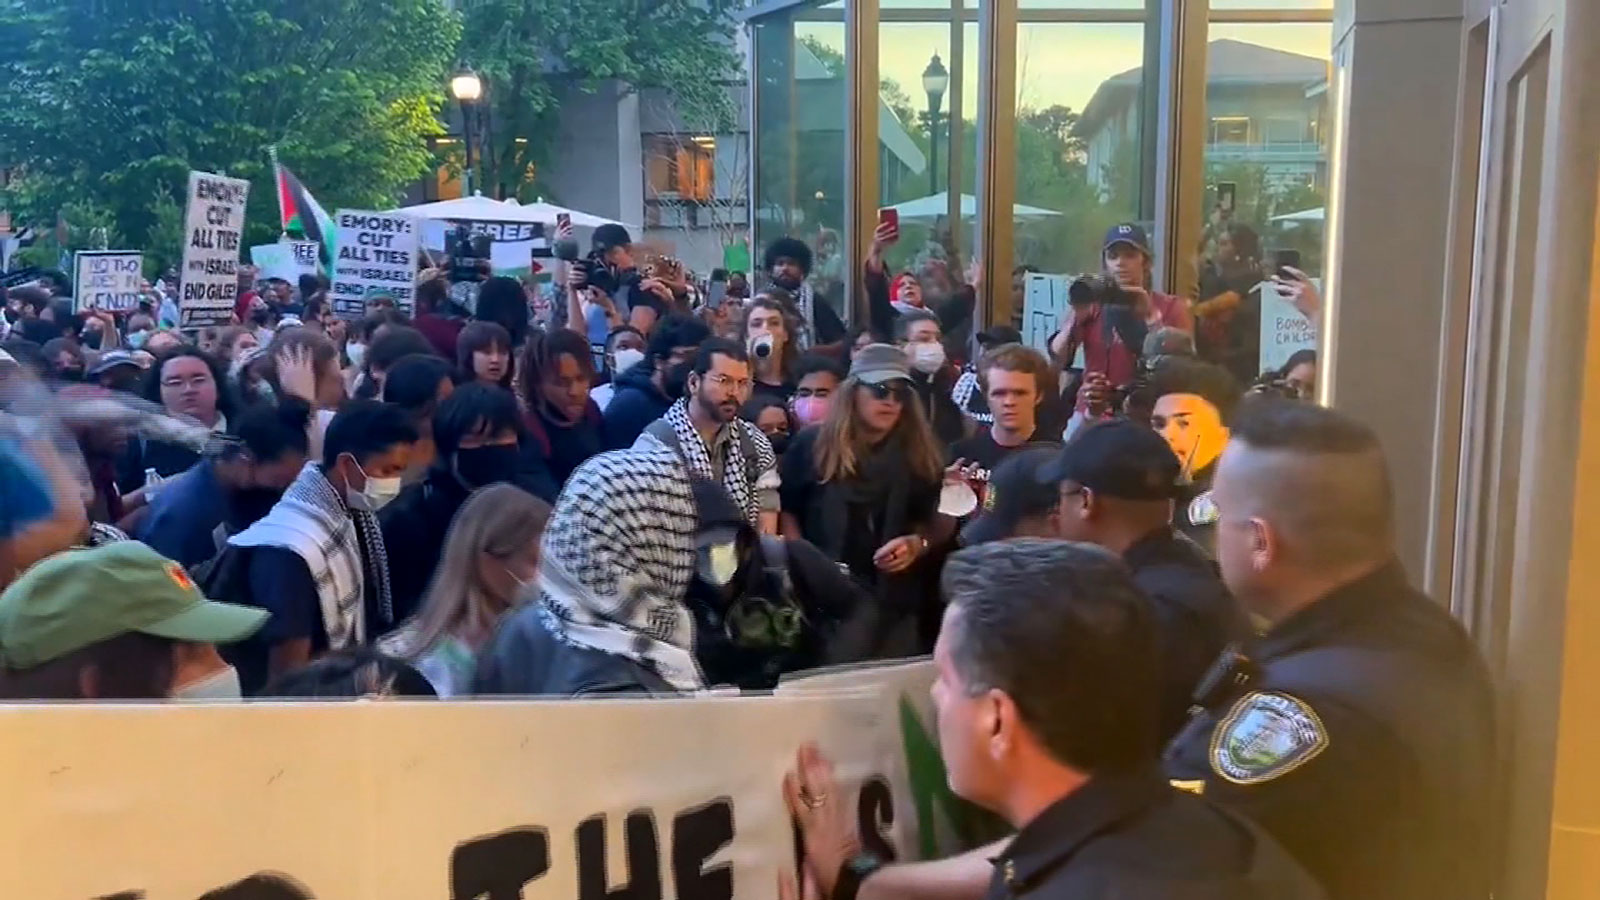 A confrontation between Emory University protesters and police resulted in officers being pressed up against a building on campus. 